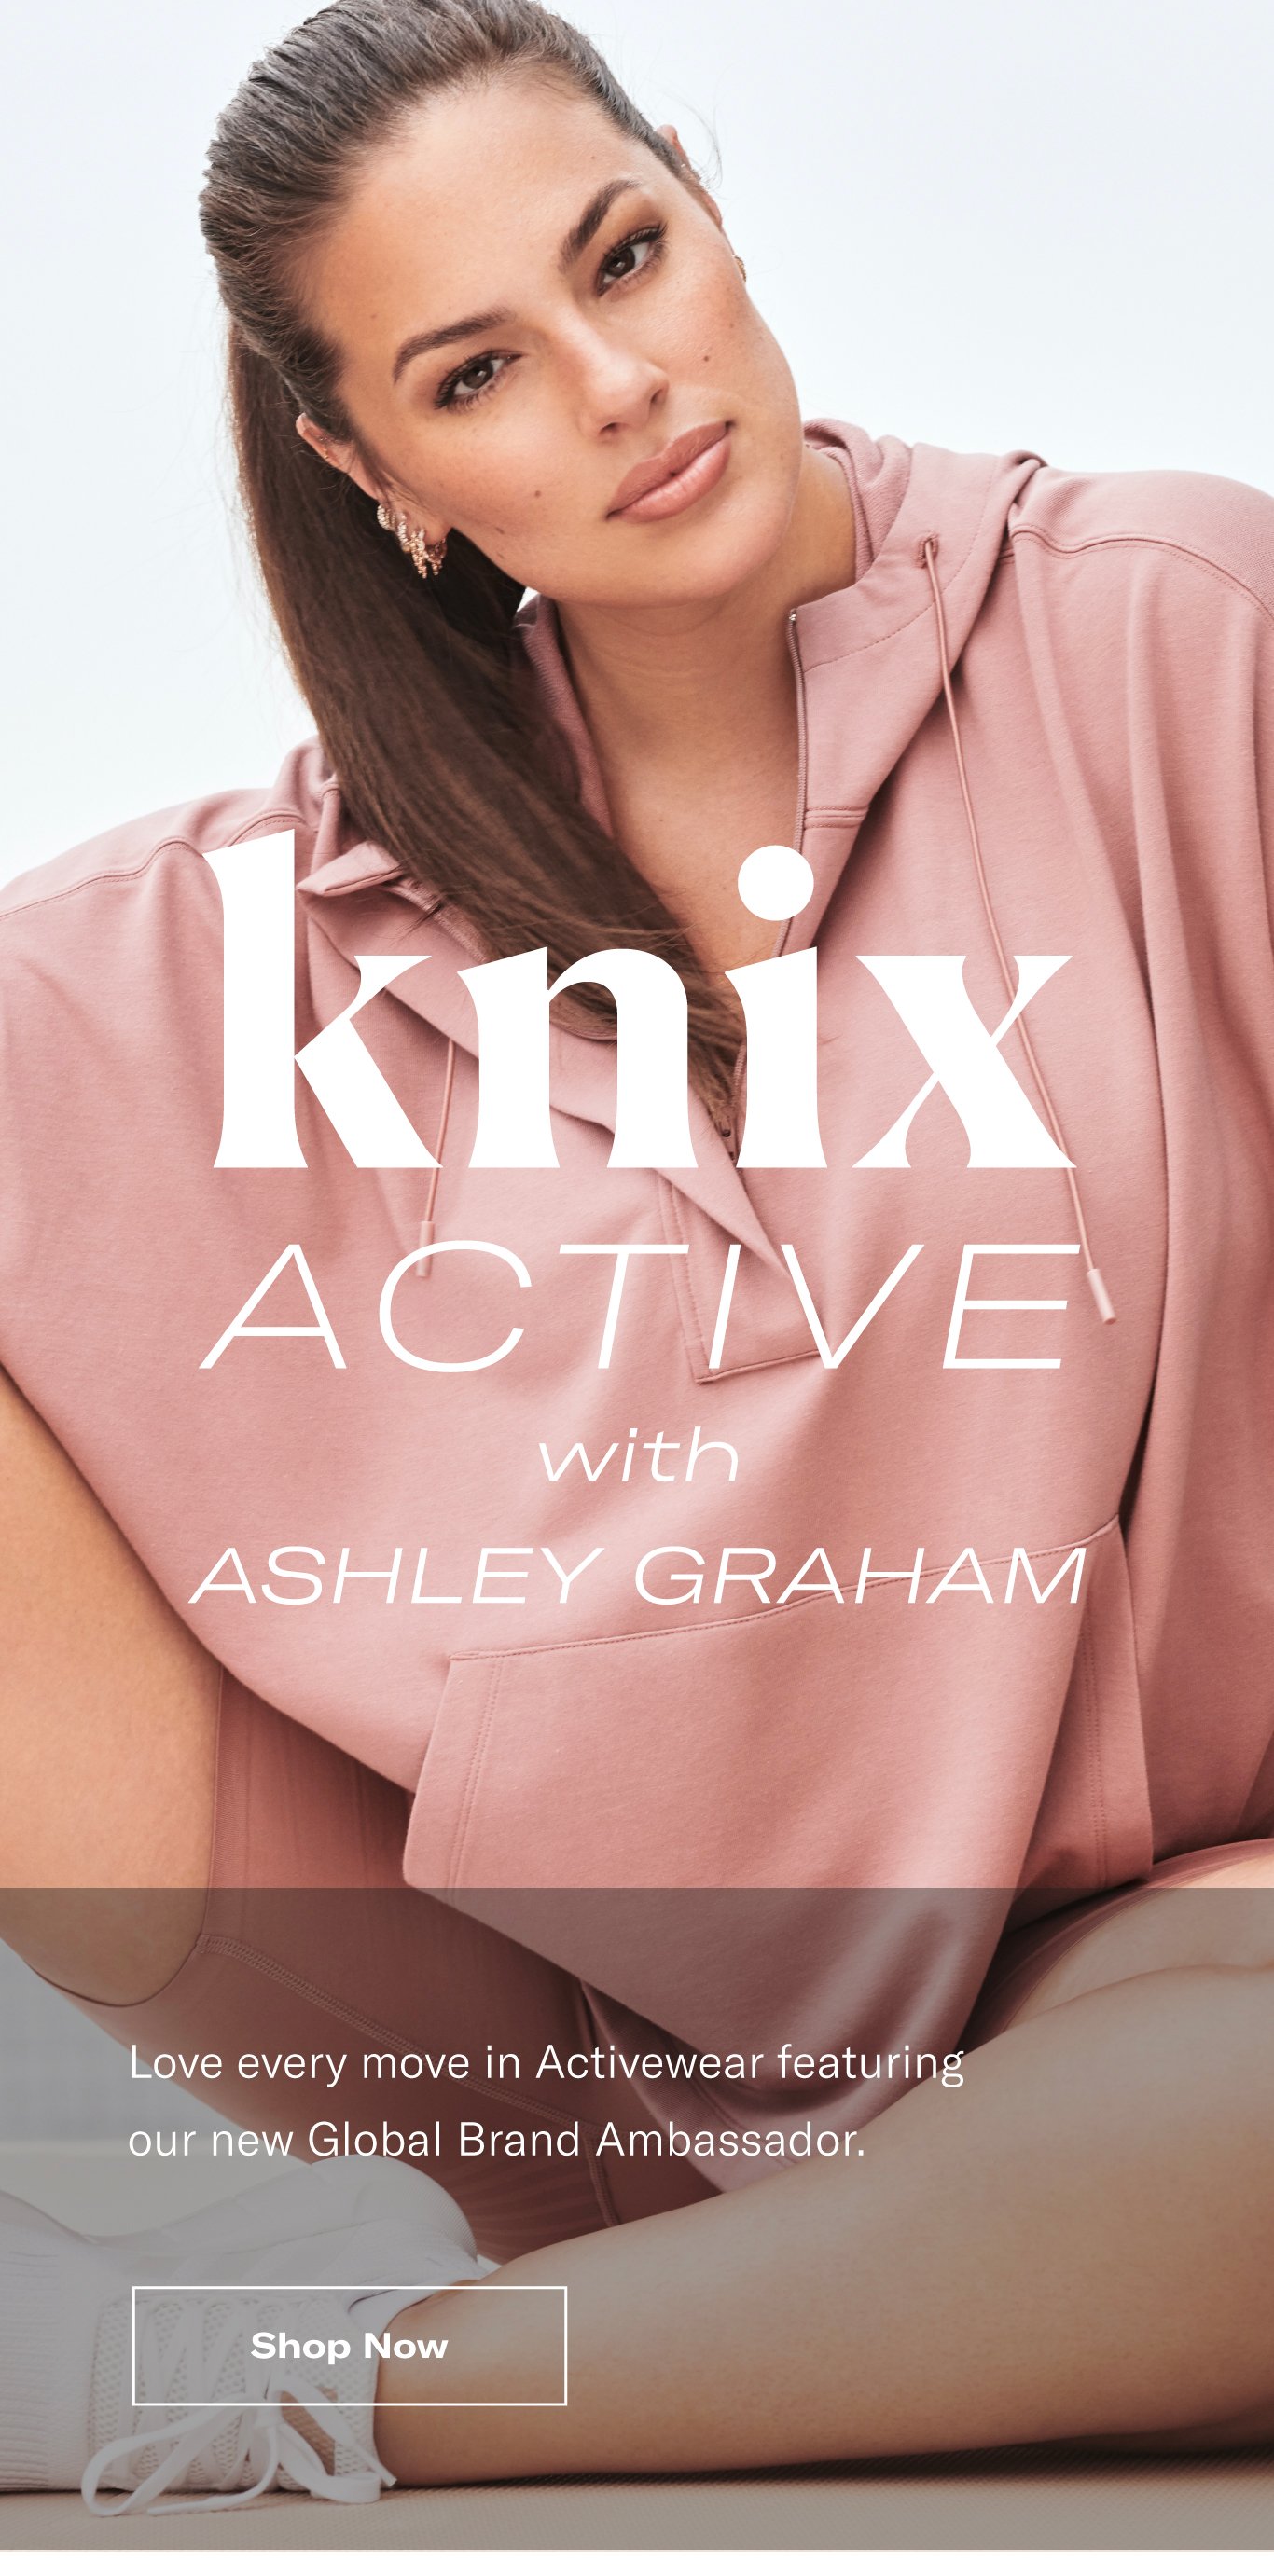 Knix: Introducing Knix Active with ASHLEY GRAHAM!